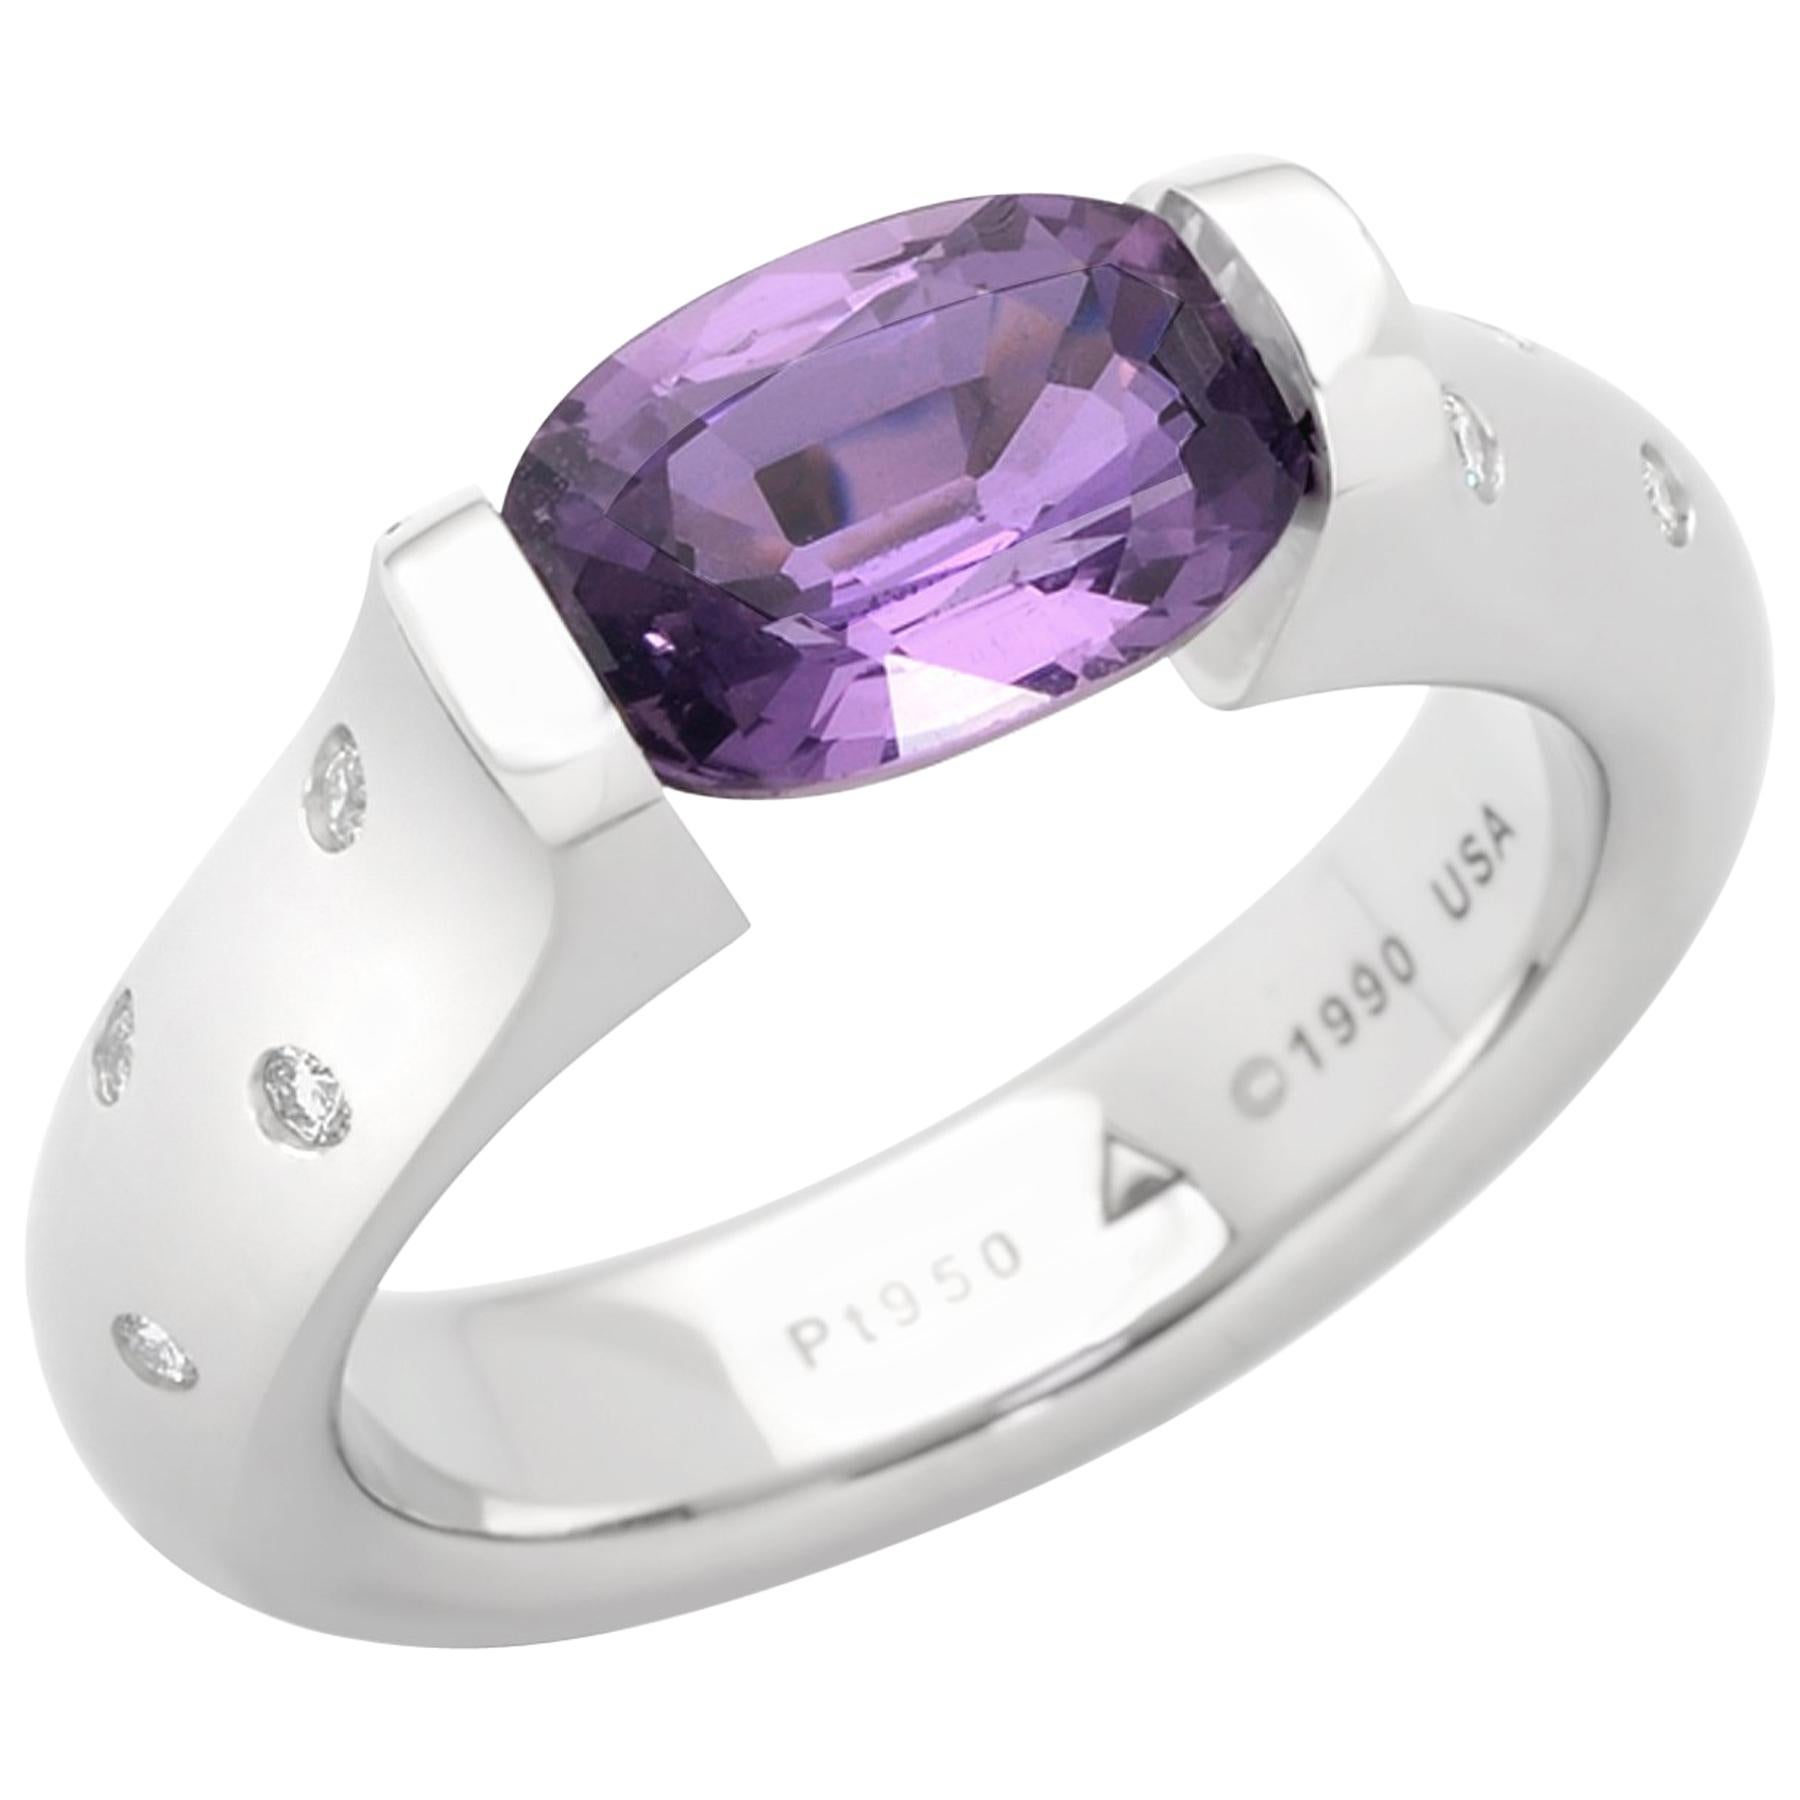 Steven Kretchmer Omega Ring with a Tension-set Purple Sapphire For Sale